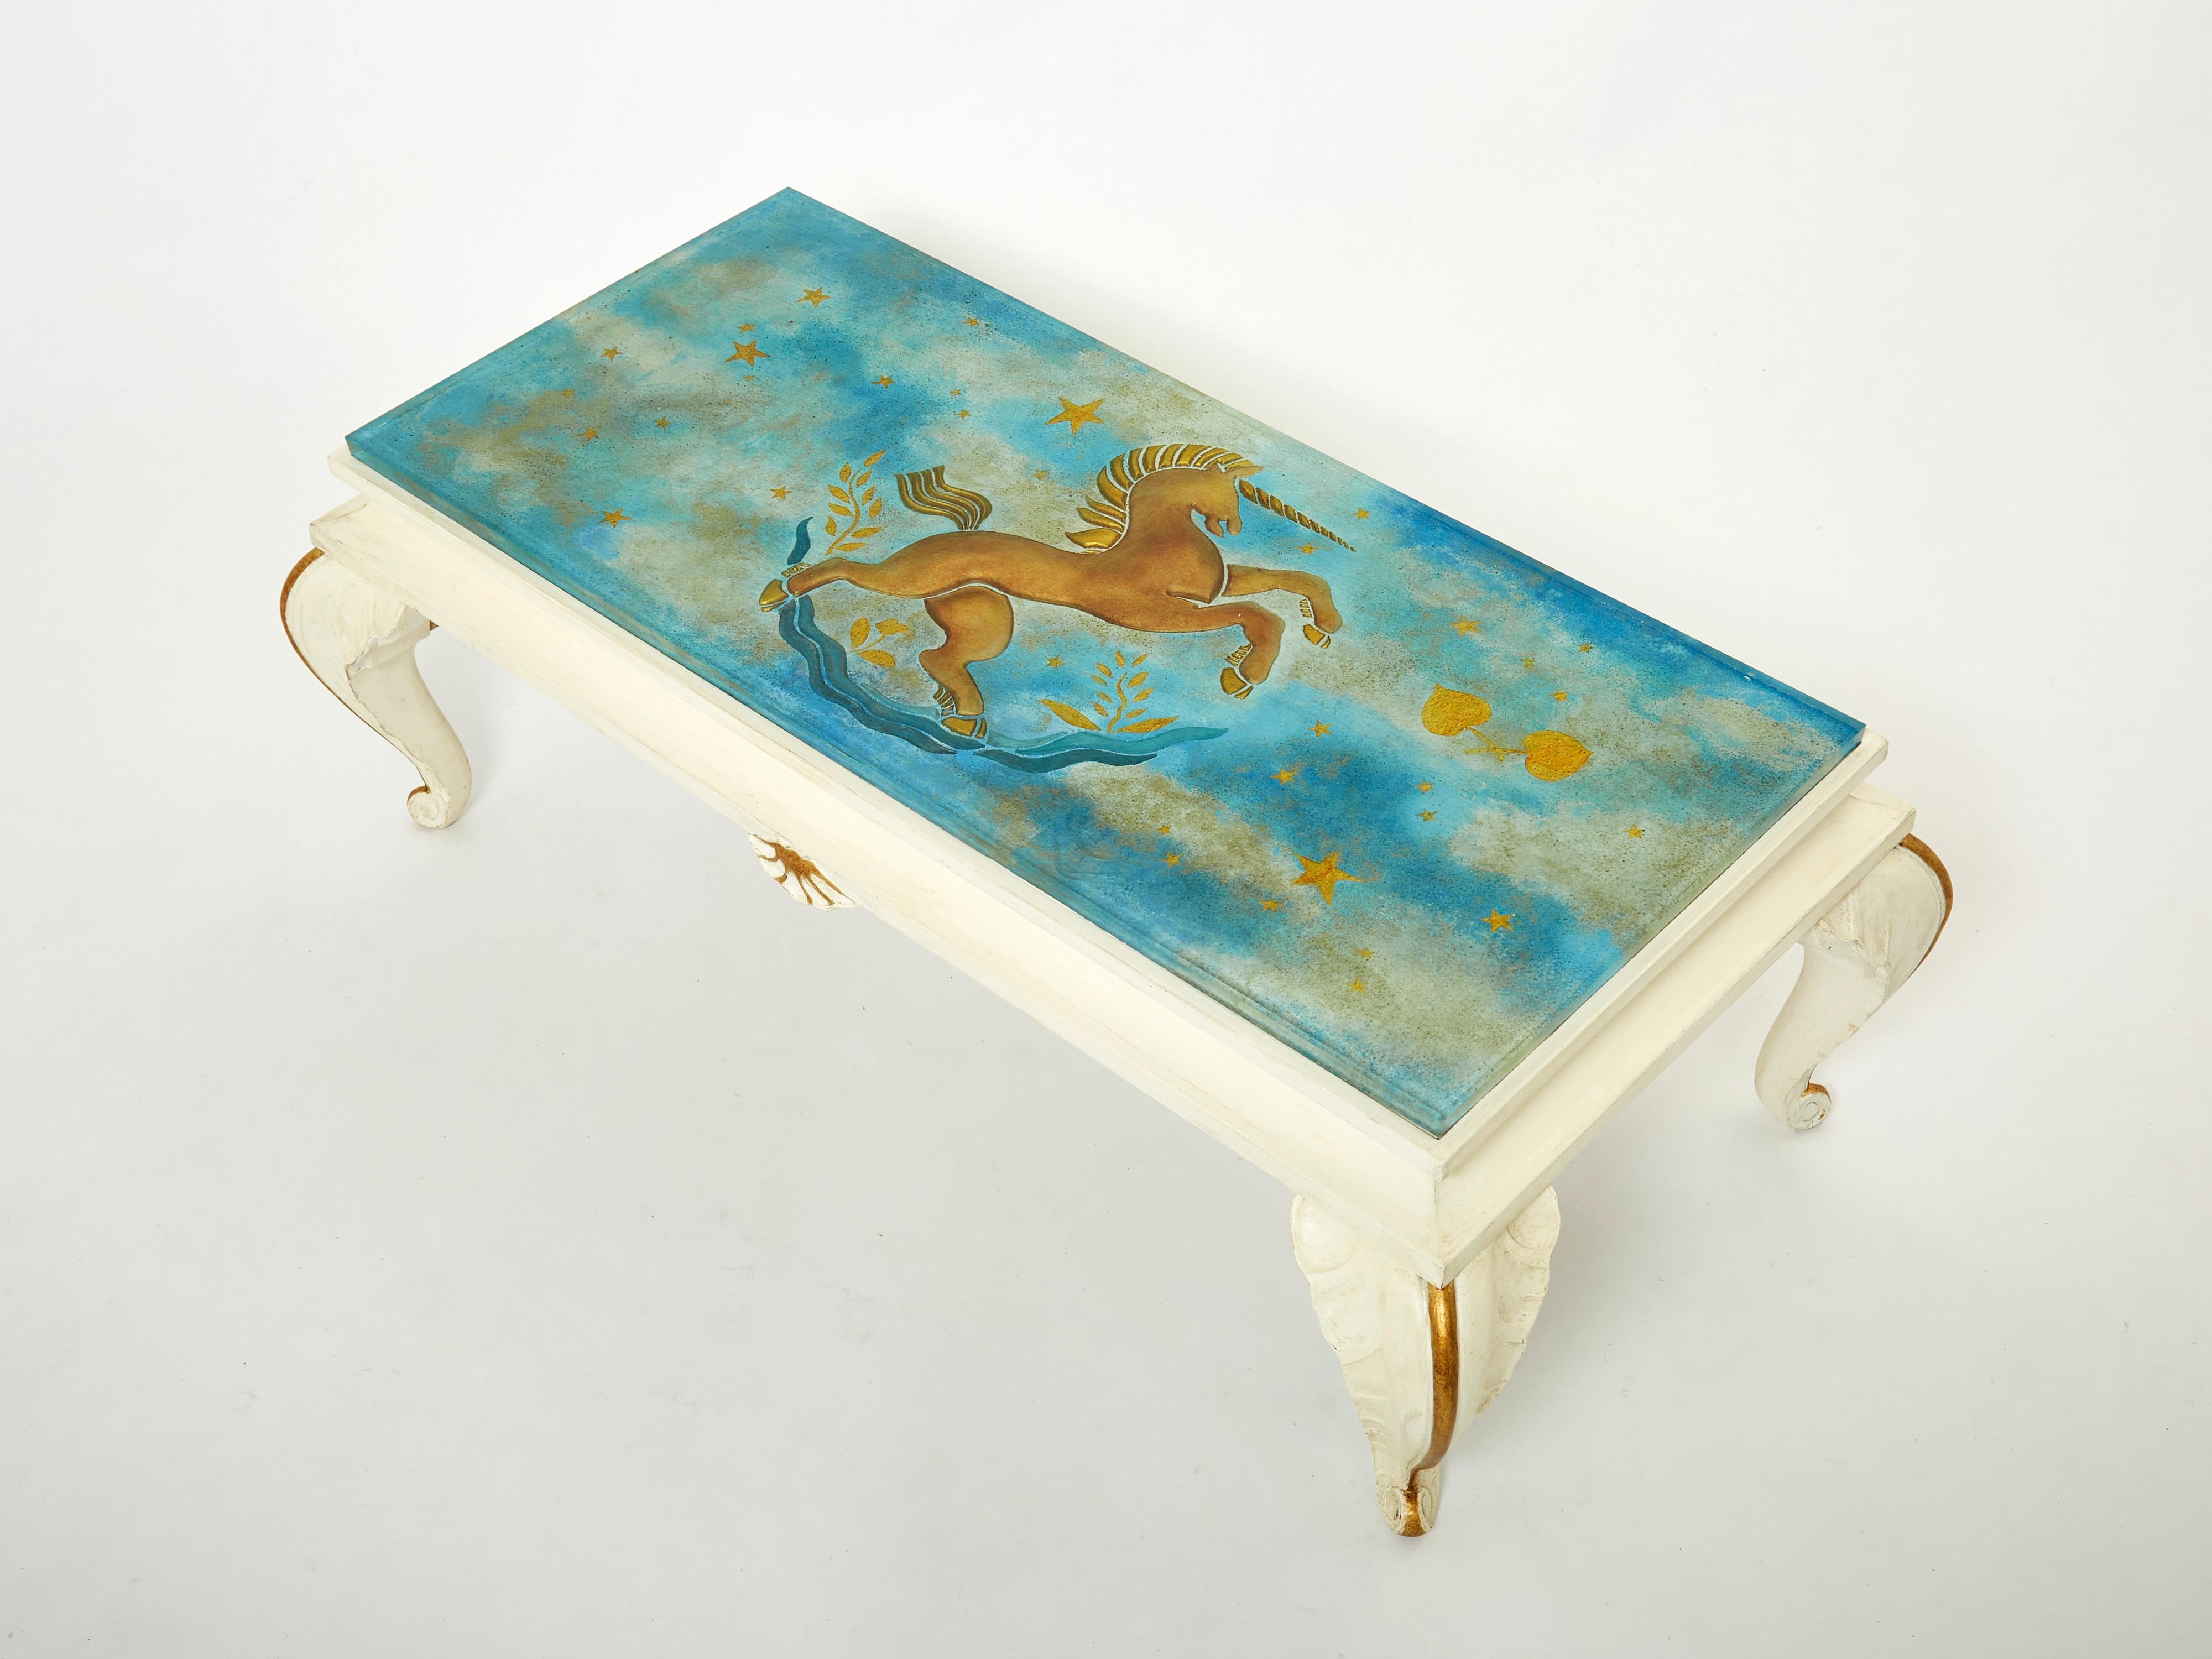 This coffee table by Maison Jansen was made in the early 1950s, with beautifully carved wood feet and structure painted in off white with gilded accents, and an amazing painted glass top picturing a unicorn into a blue clouded sky. The thick Saint